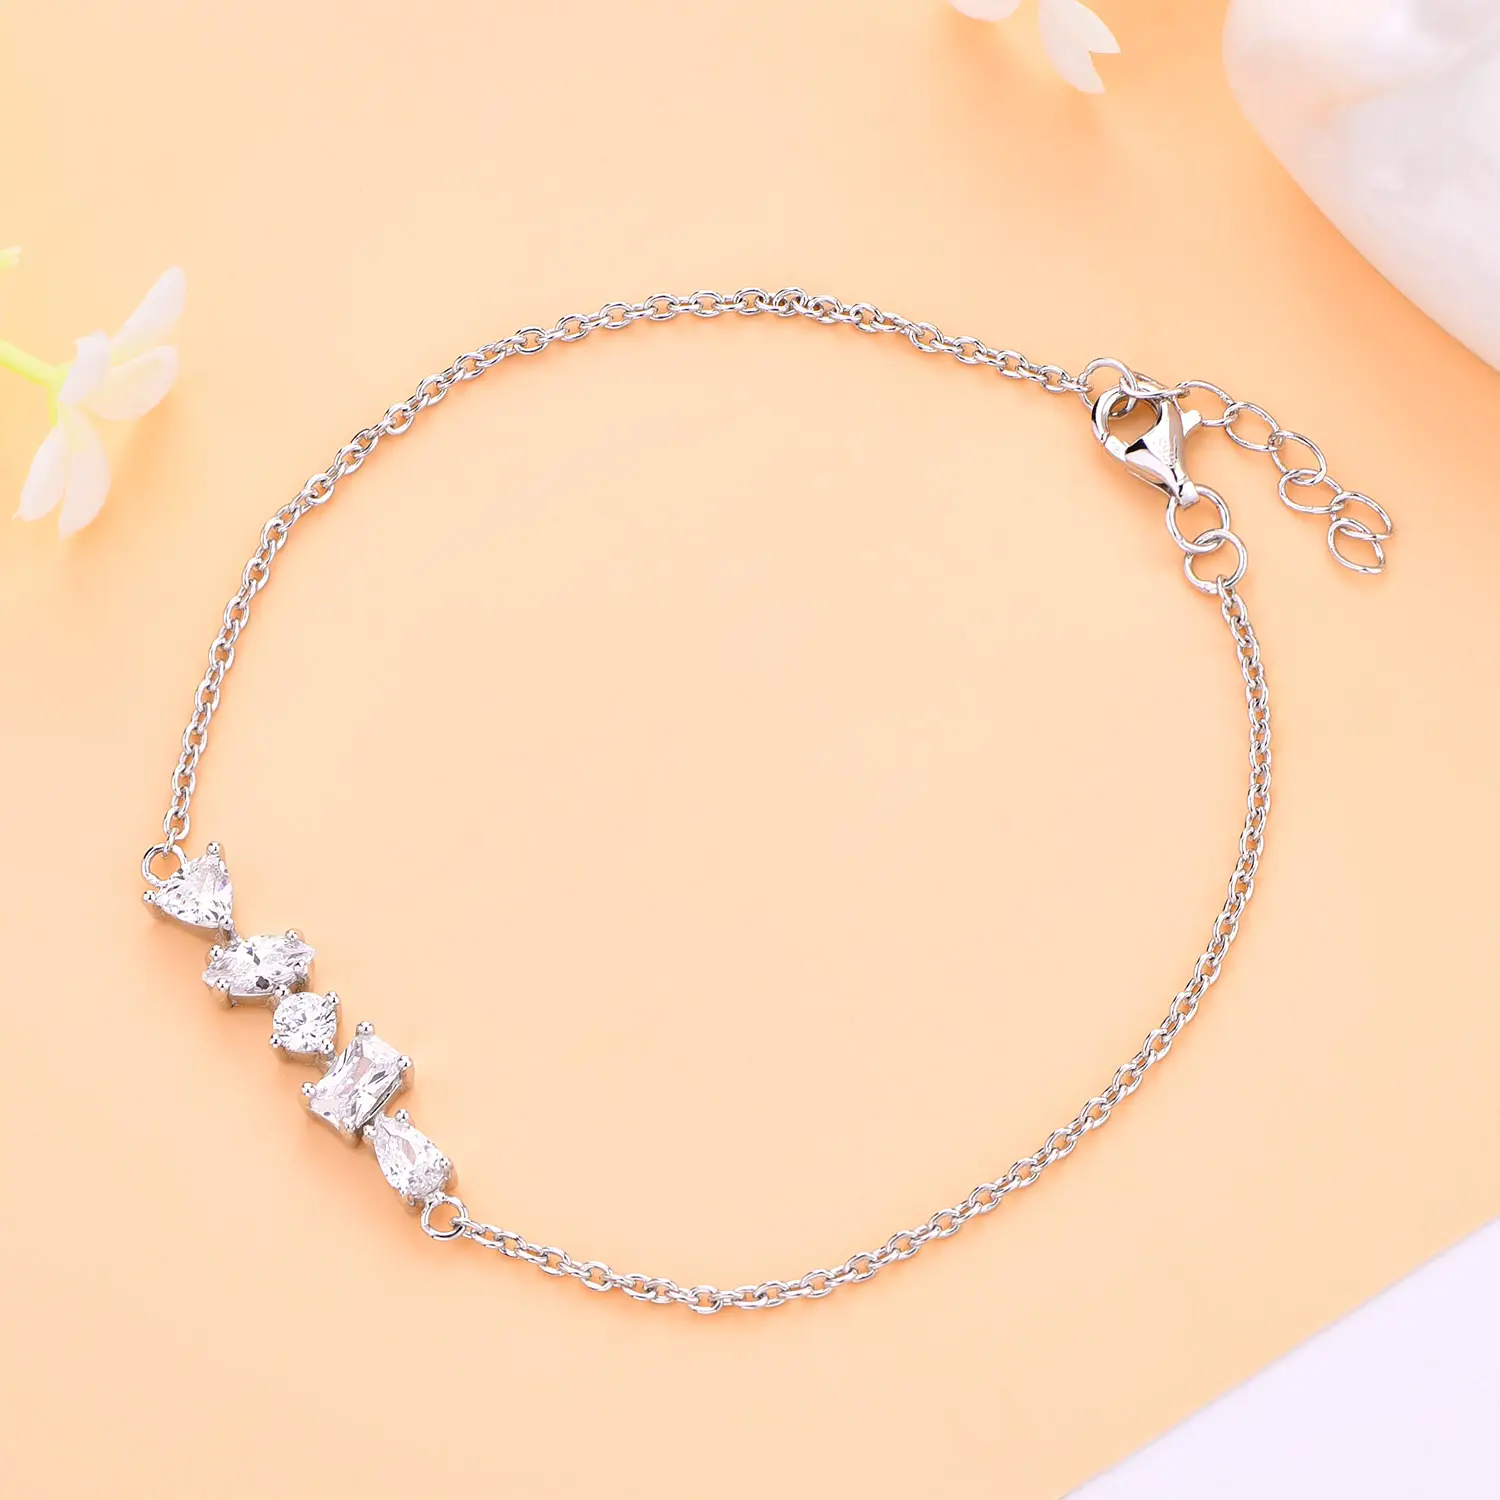 Wholesale and custom Jewelry 925 Silver Women Bracelet Rhodium plated With 5 different shape White Cubic Zircon